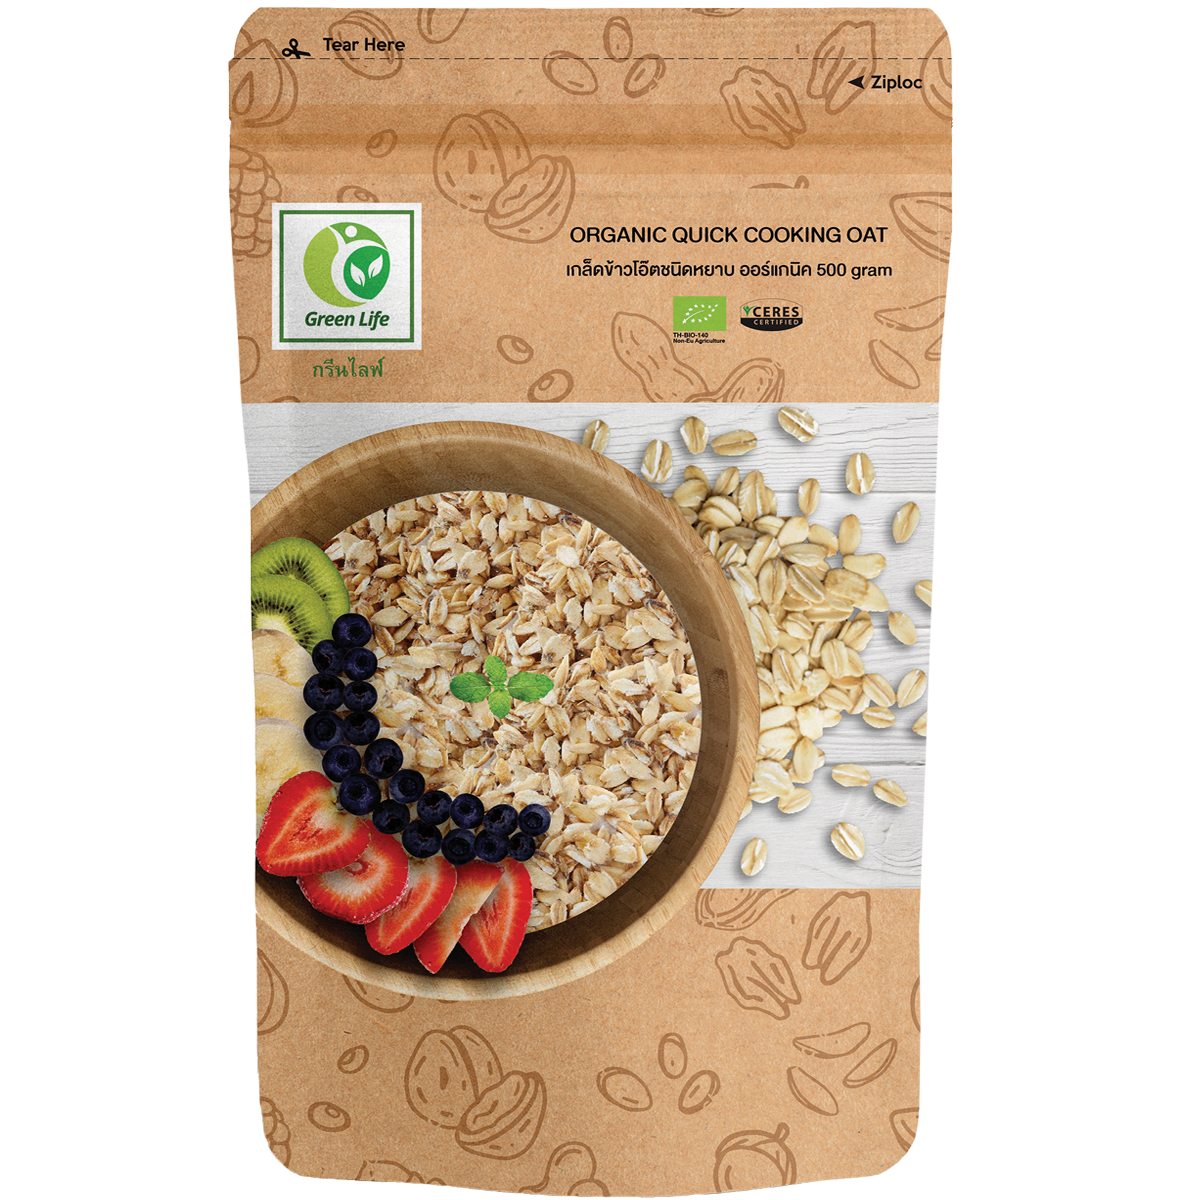 Organic Quick Cooking Oat